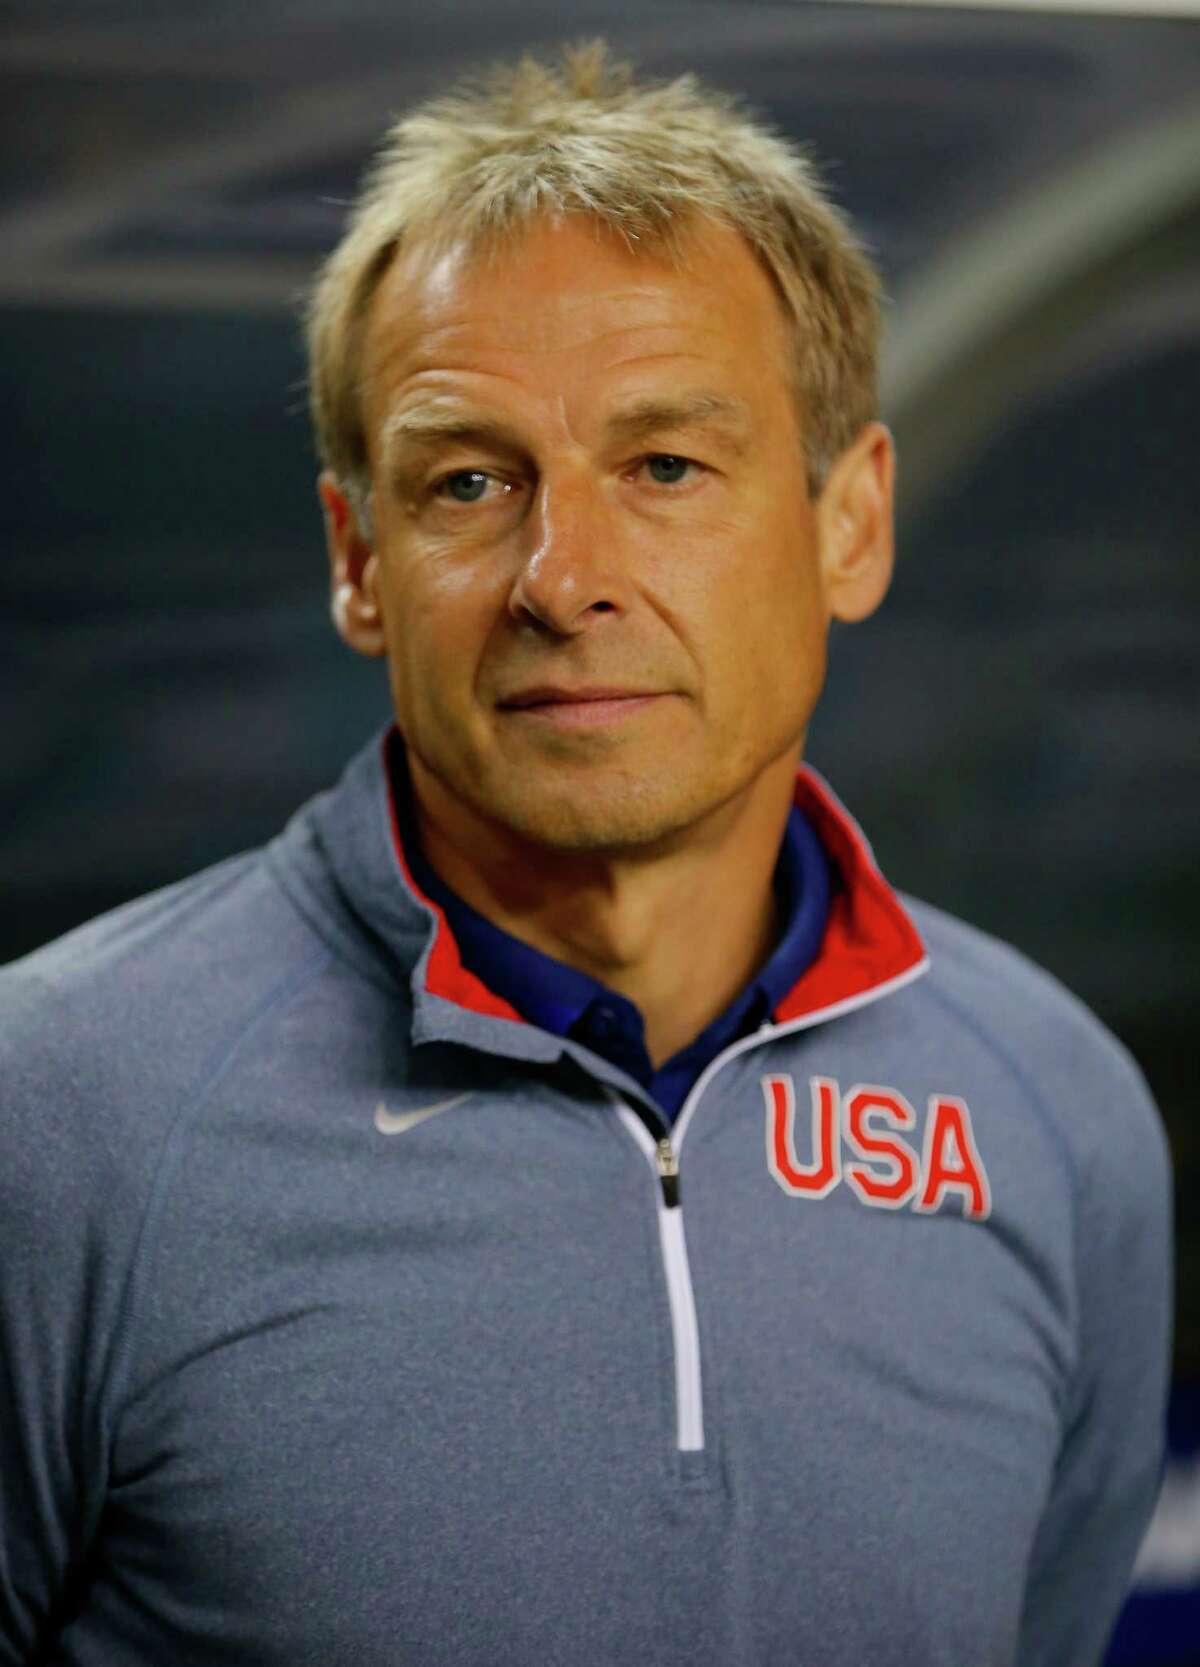 ATLANTA, GA - JULY 22: Jurgen Klinsmann of the United States of America stands prior to the 2015 CONCACAF Golf Cup Semifinal match between Jamaica and the United States at Georgia Dome on July 22, 2015 in Atlanta, Georgia. (Photo by Kevin C. Cox/Getty Images)